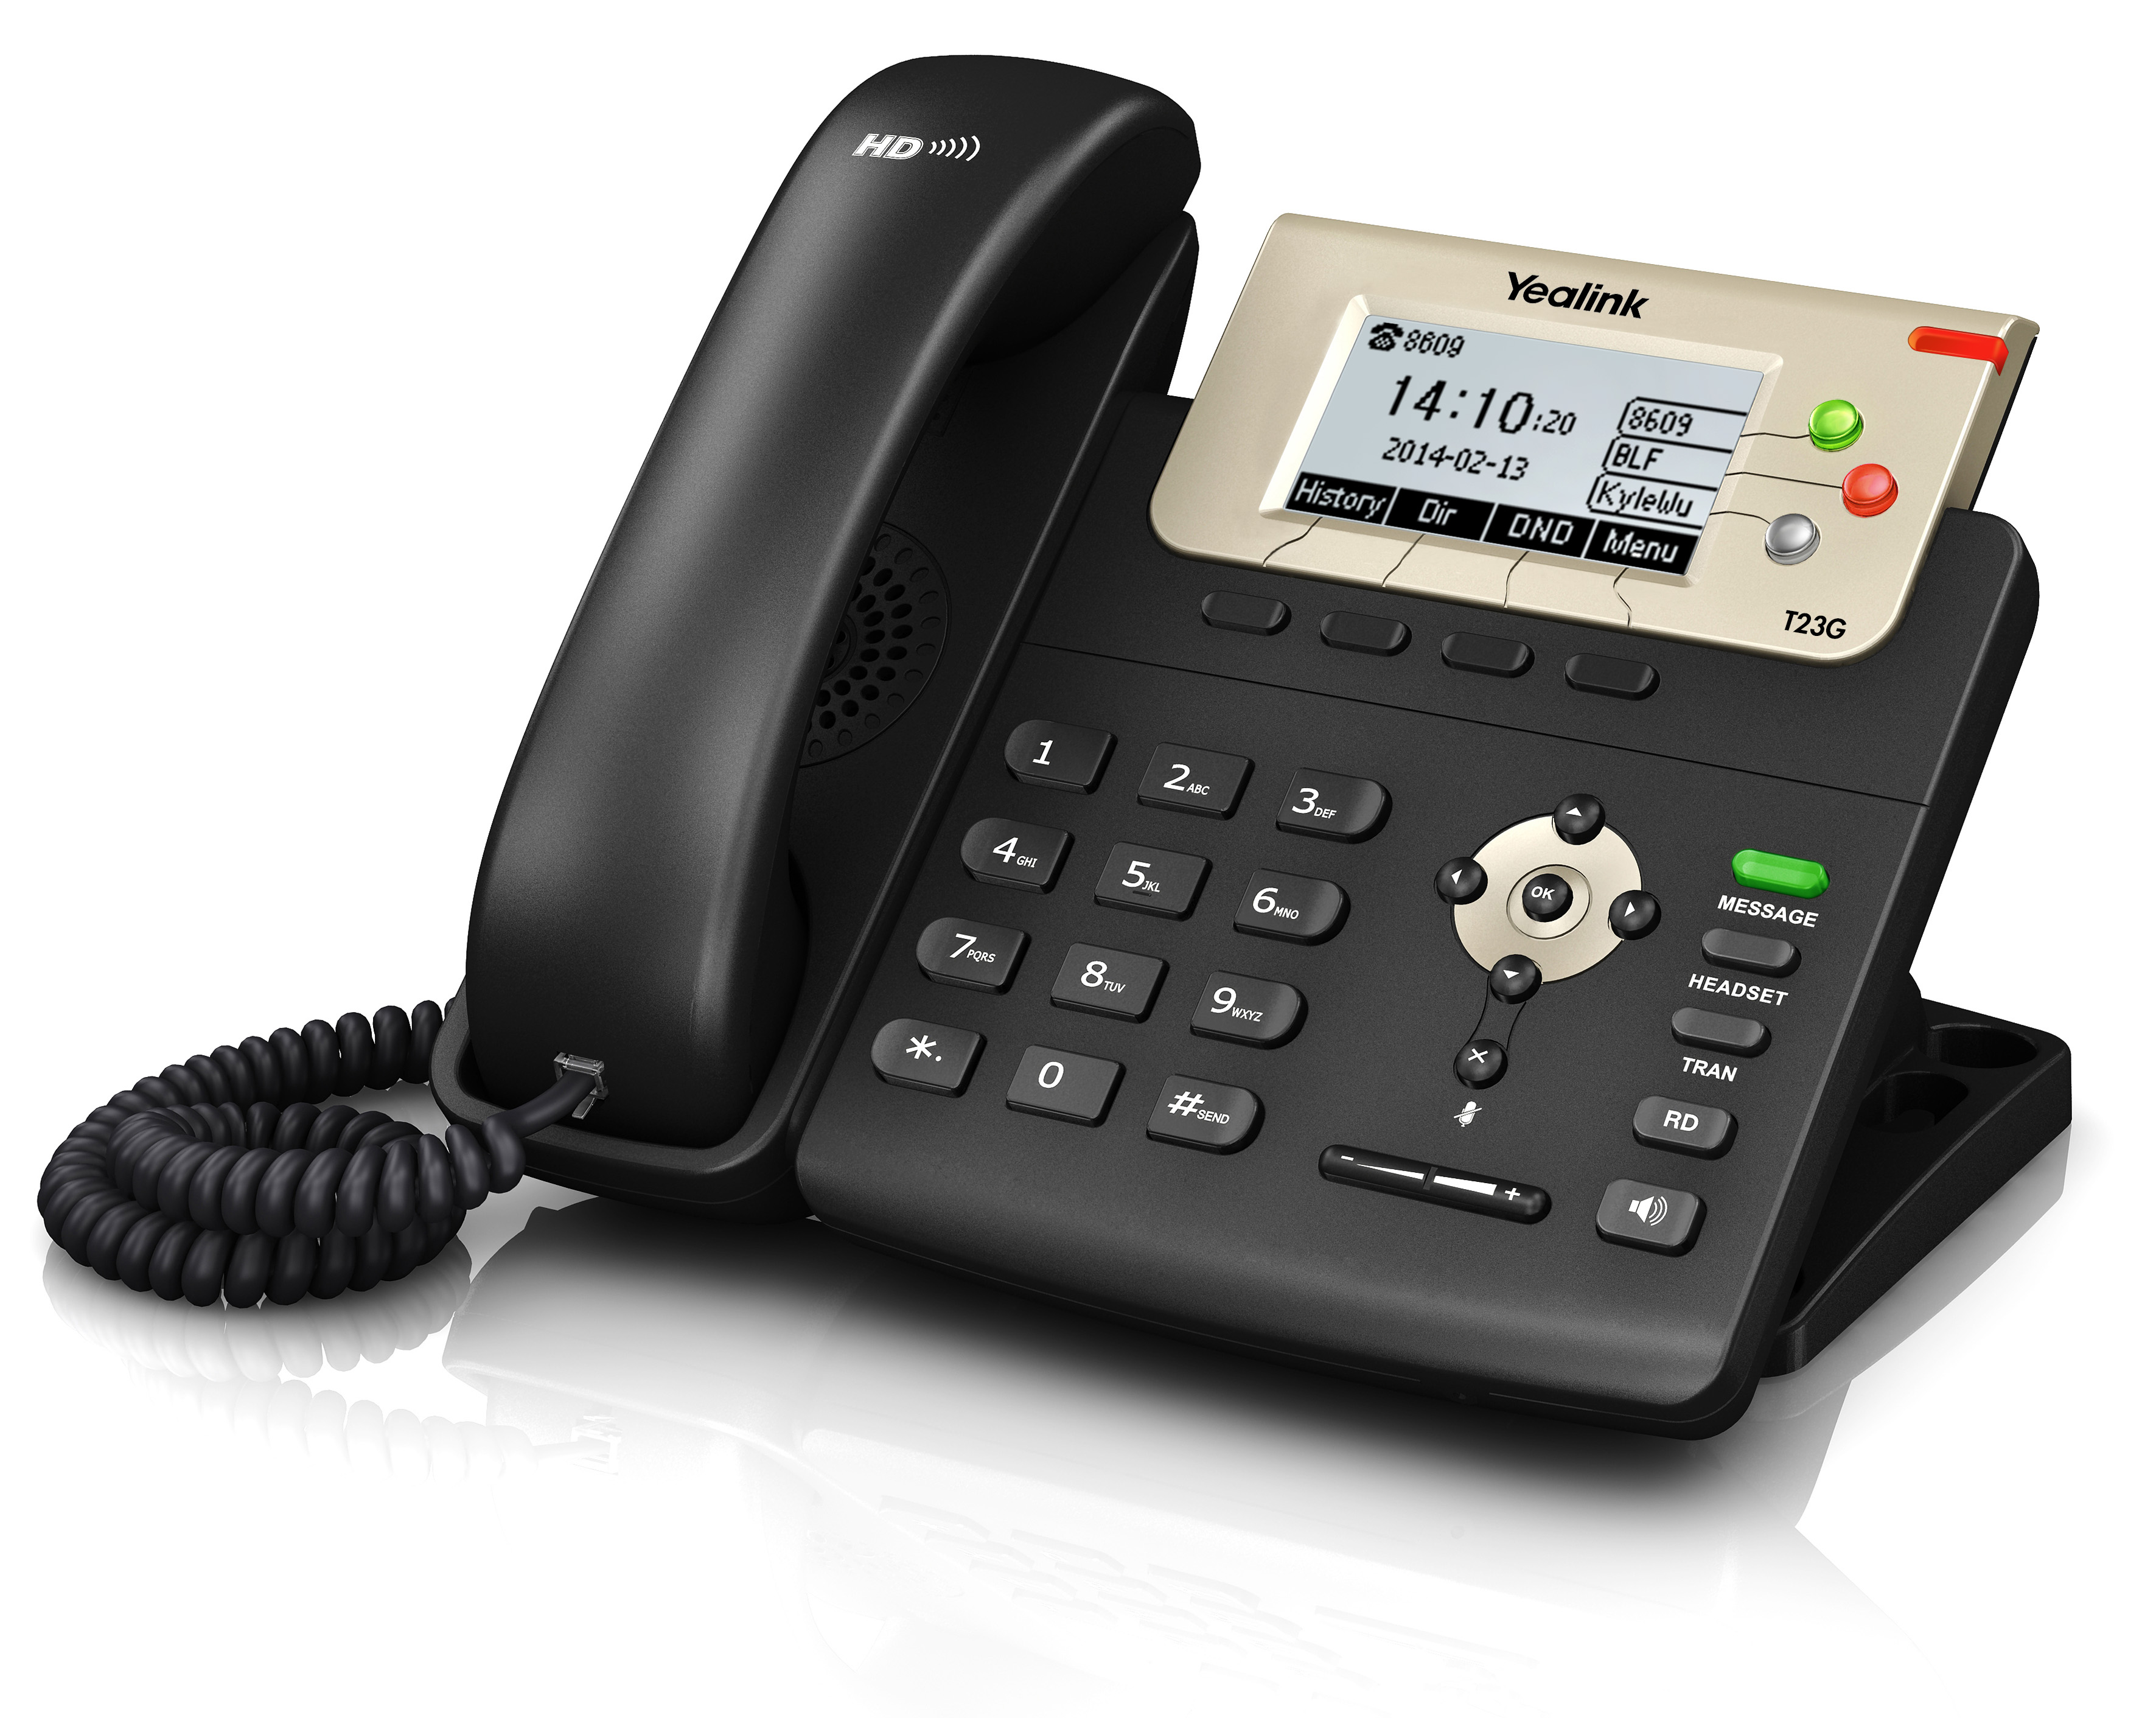 Photograph of Yealink T23GN IP Phone